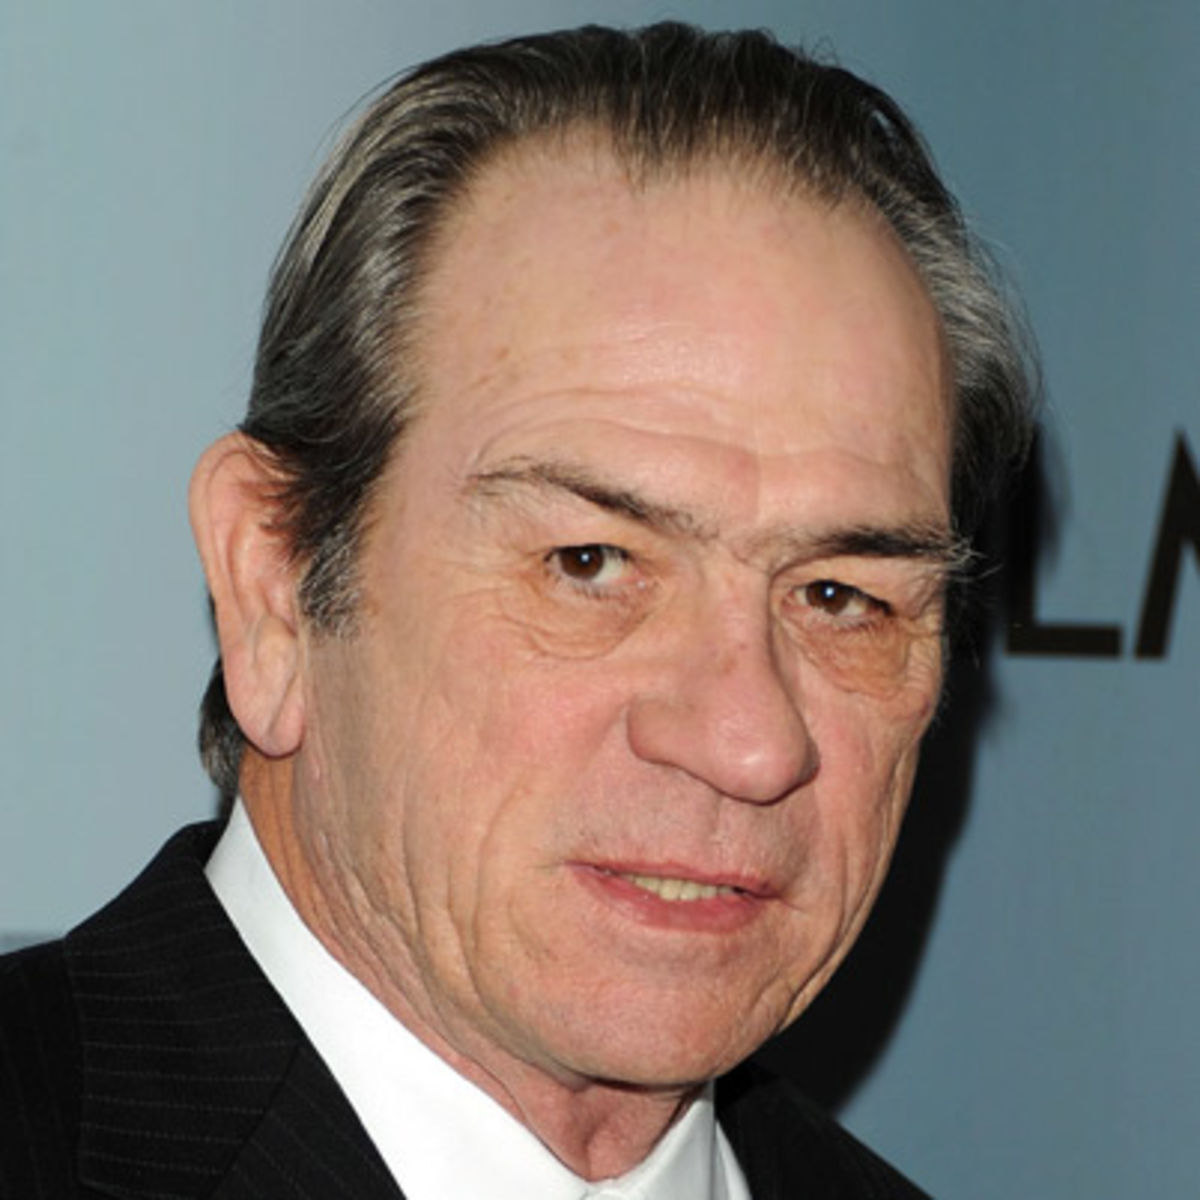 Tommy Lee Jones:
I used to work at Starbucks in San Antonio and Tommy Lee Jones has a home there. He strolled into my store one day. He was a dick. He argued with us about a syrup charge and then complained about his drink. We offered to remake it, but he left grumbling and being an overall dick. I know he has that reputation, but I honestly didn't really believe it until I interacted with him. One of the customers asked for his autograph and he told her to fuck herself.